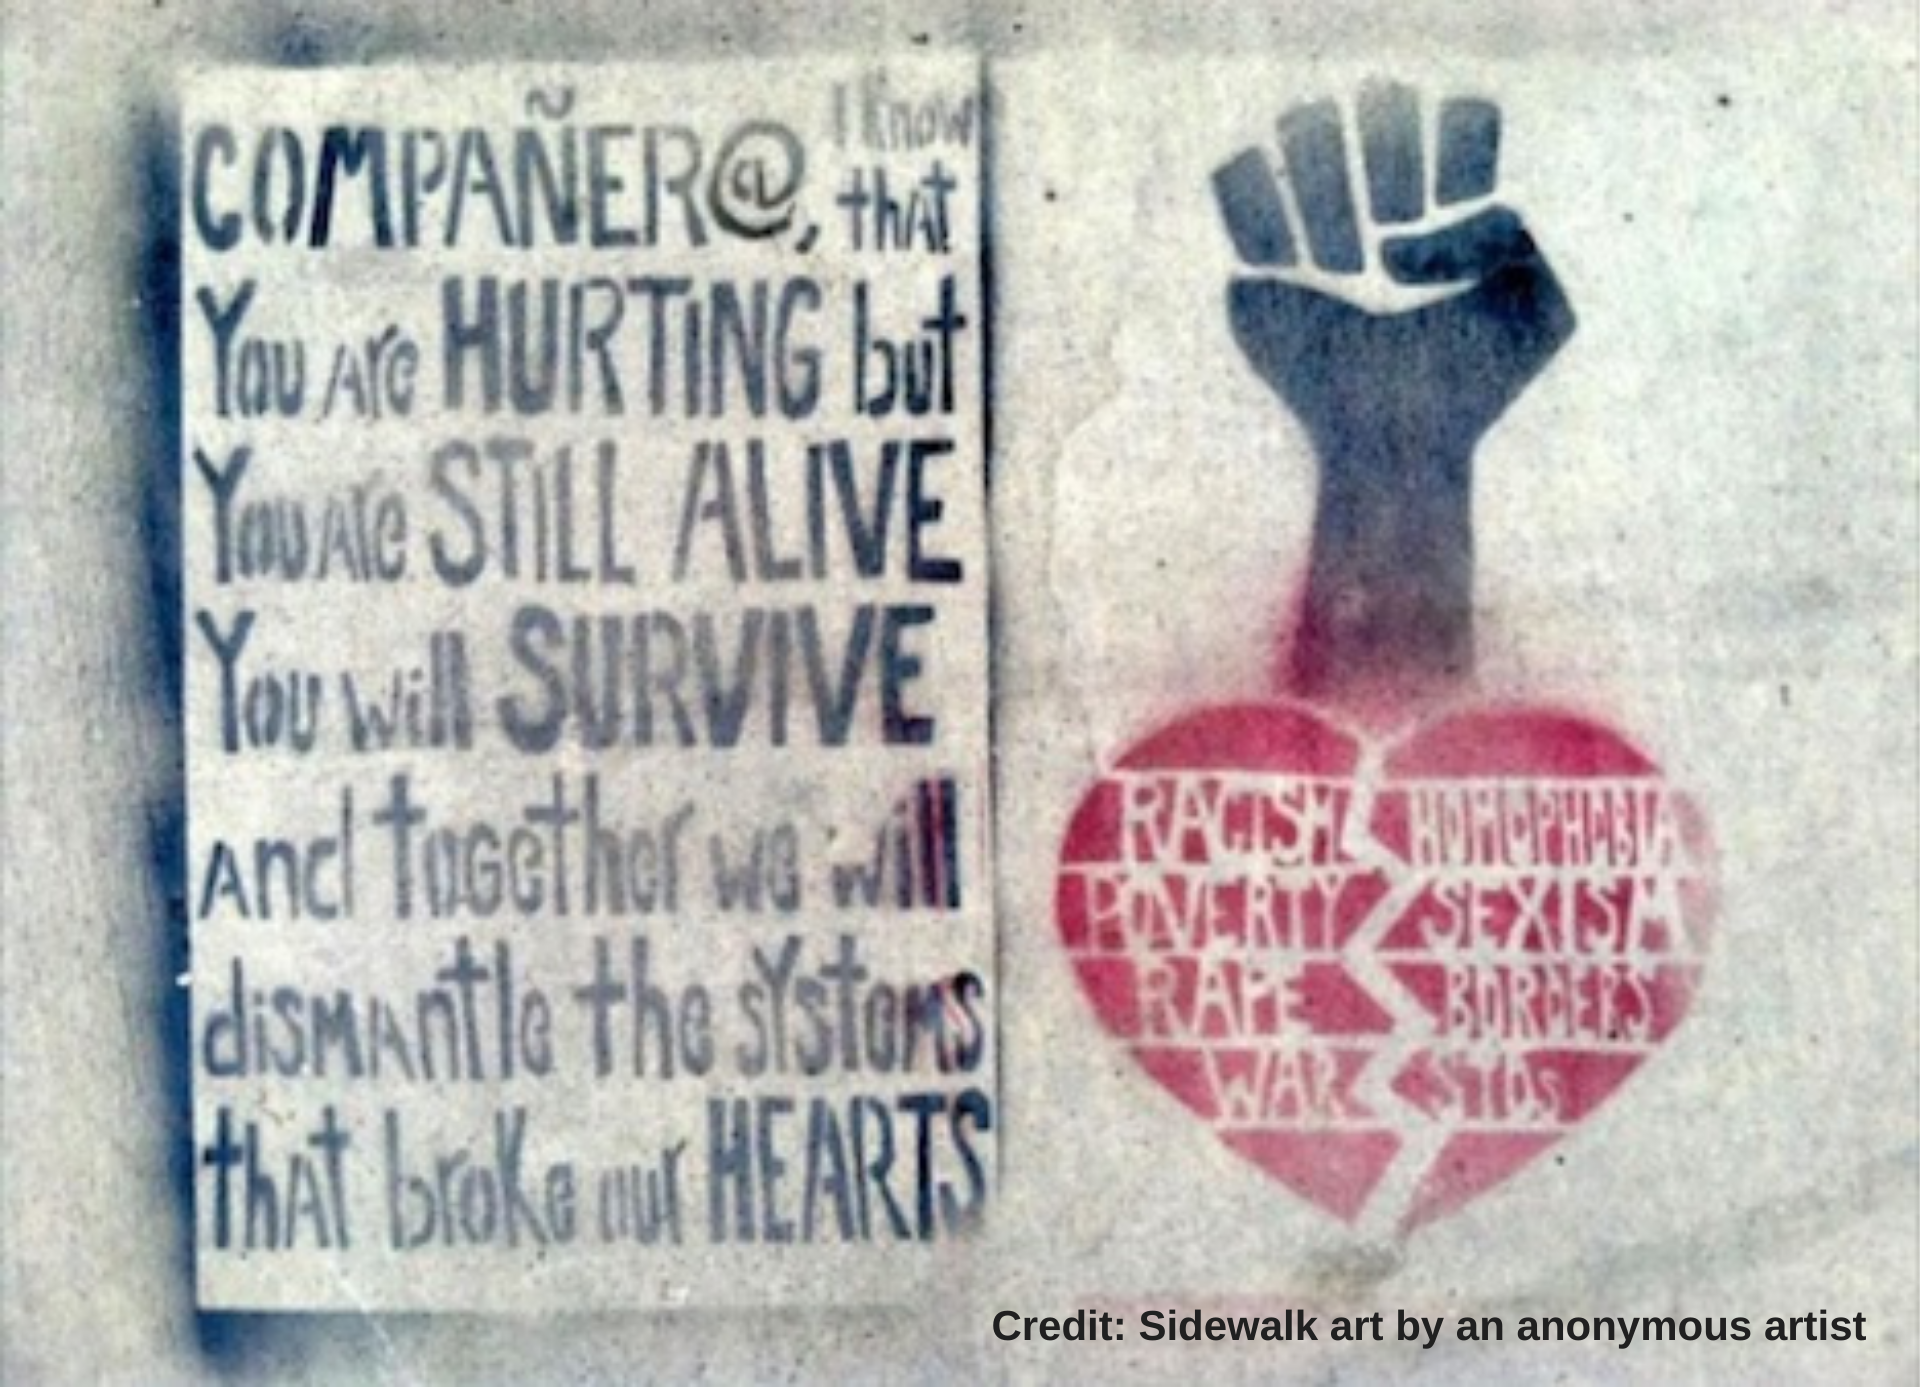 Image is text and drawing on a sidewalk. Black text on the left reads: Companer@, I know that you are hurting but you are still alive, you will survive, and together we will dismantle the systems that broke our hearts. To the right is a red broken heart that has the words racism, poverty, rape, war, homophobia, sexism, border, STDs with a black fist coming out the top